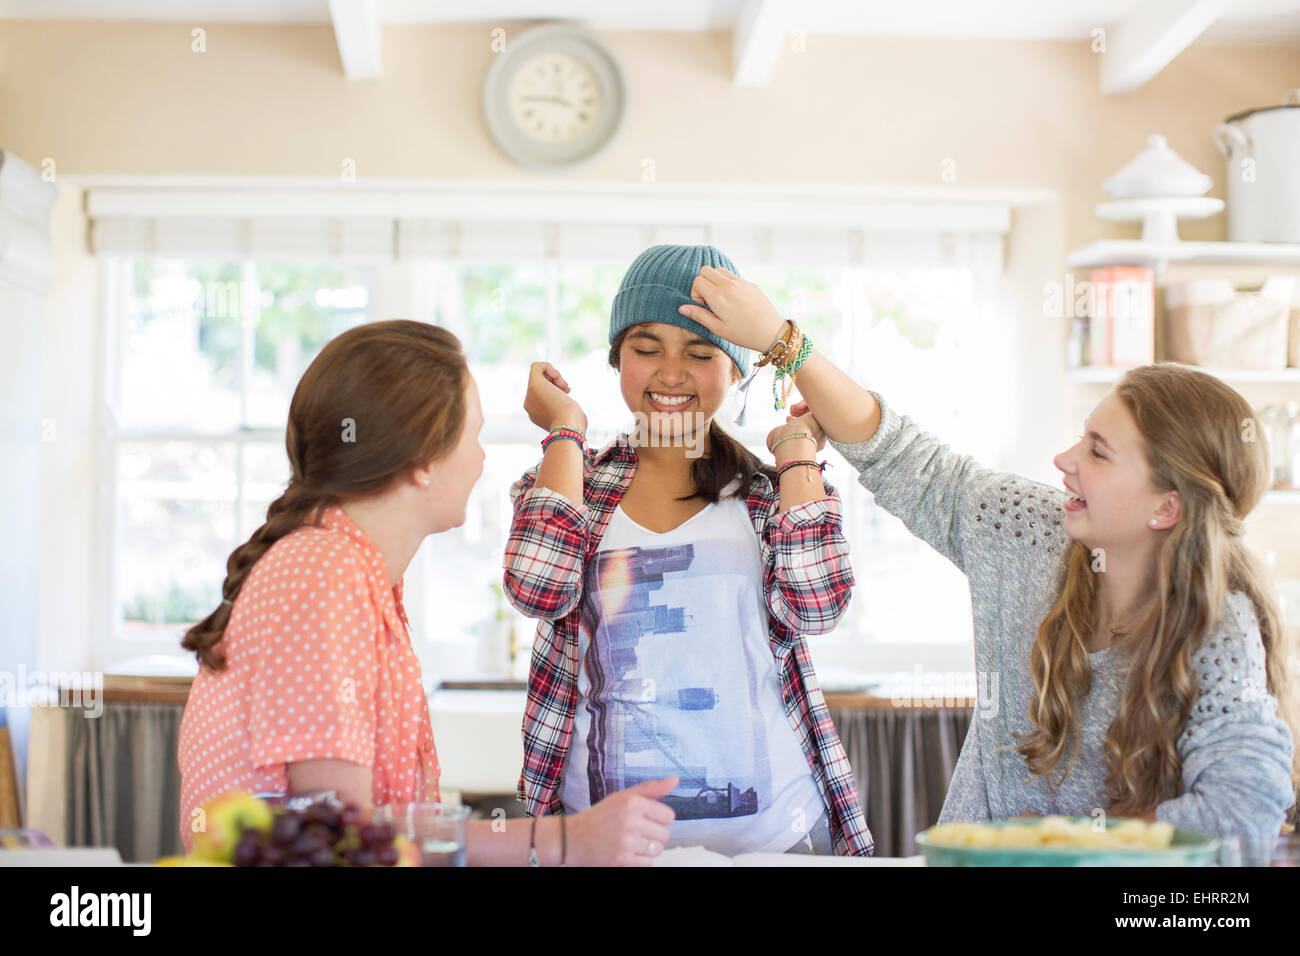 Three teenage girls playing with beanie in dining room Stock Photo